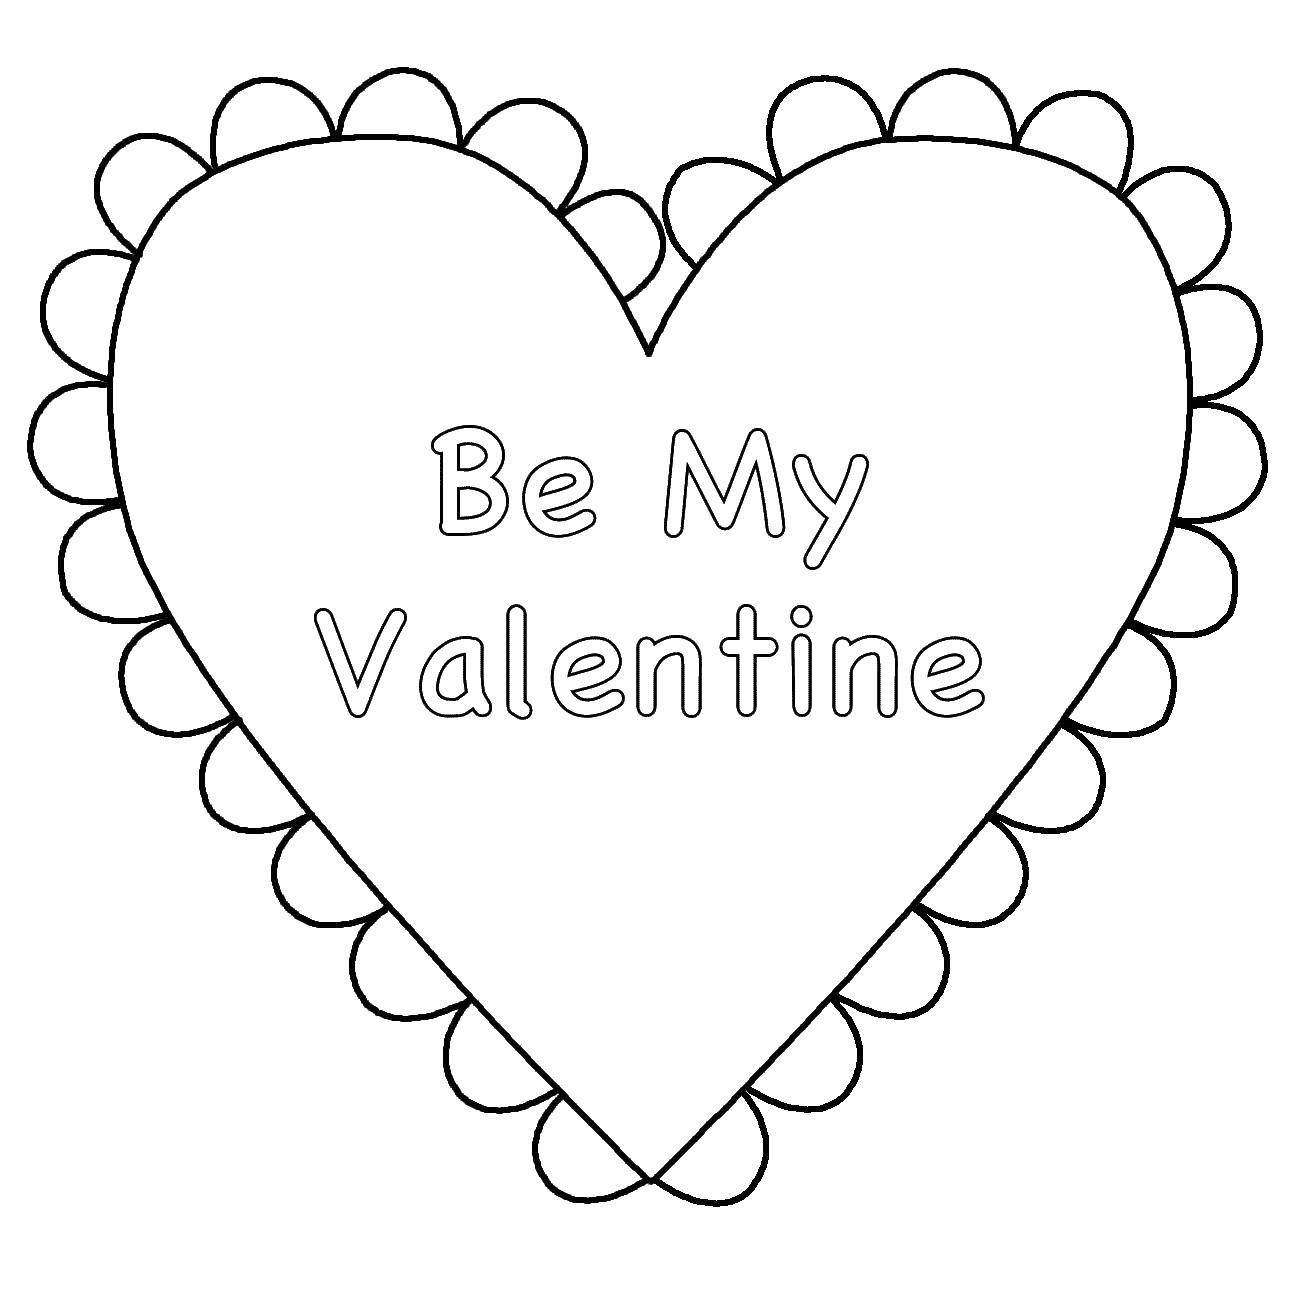 Coloring Card heart. Category Valentines day. Tags:  heart, postcard, label.